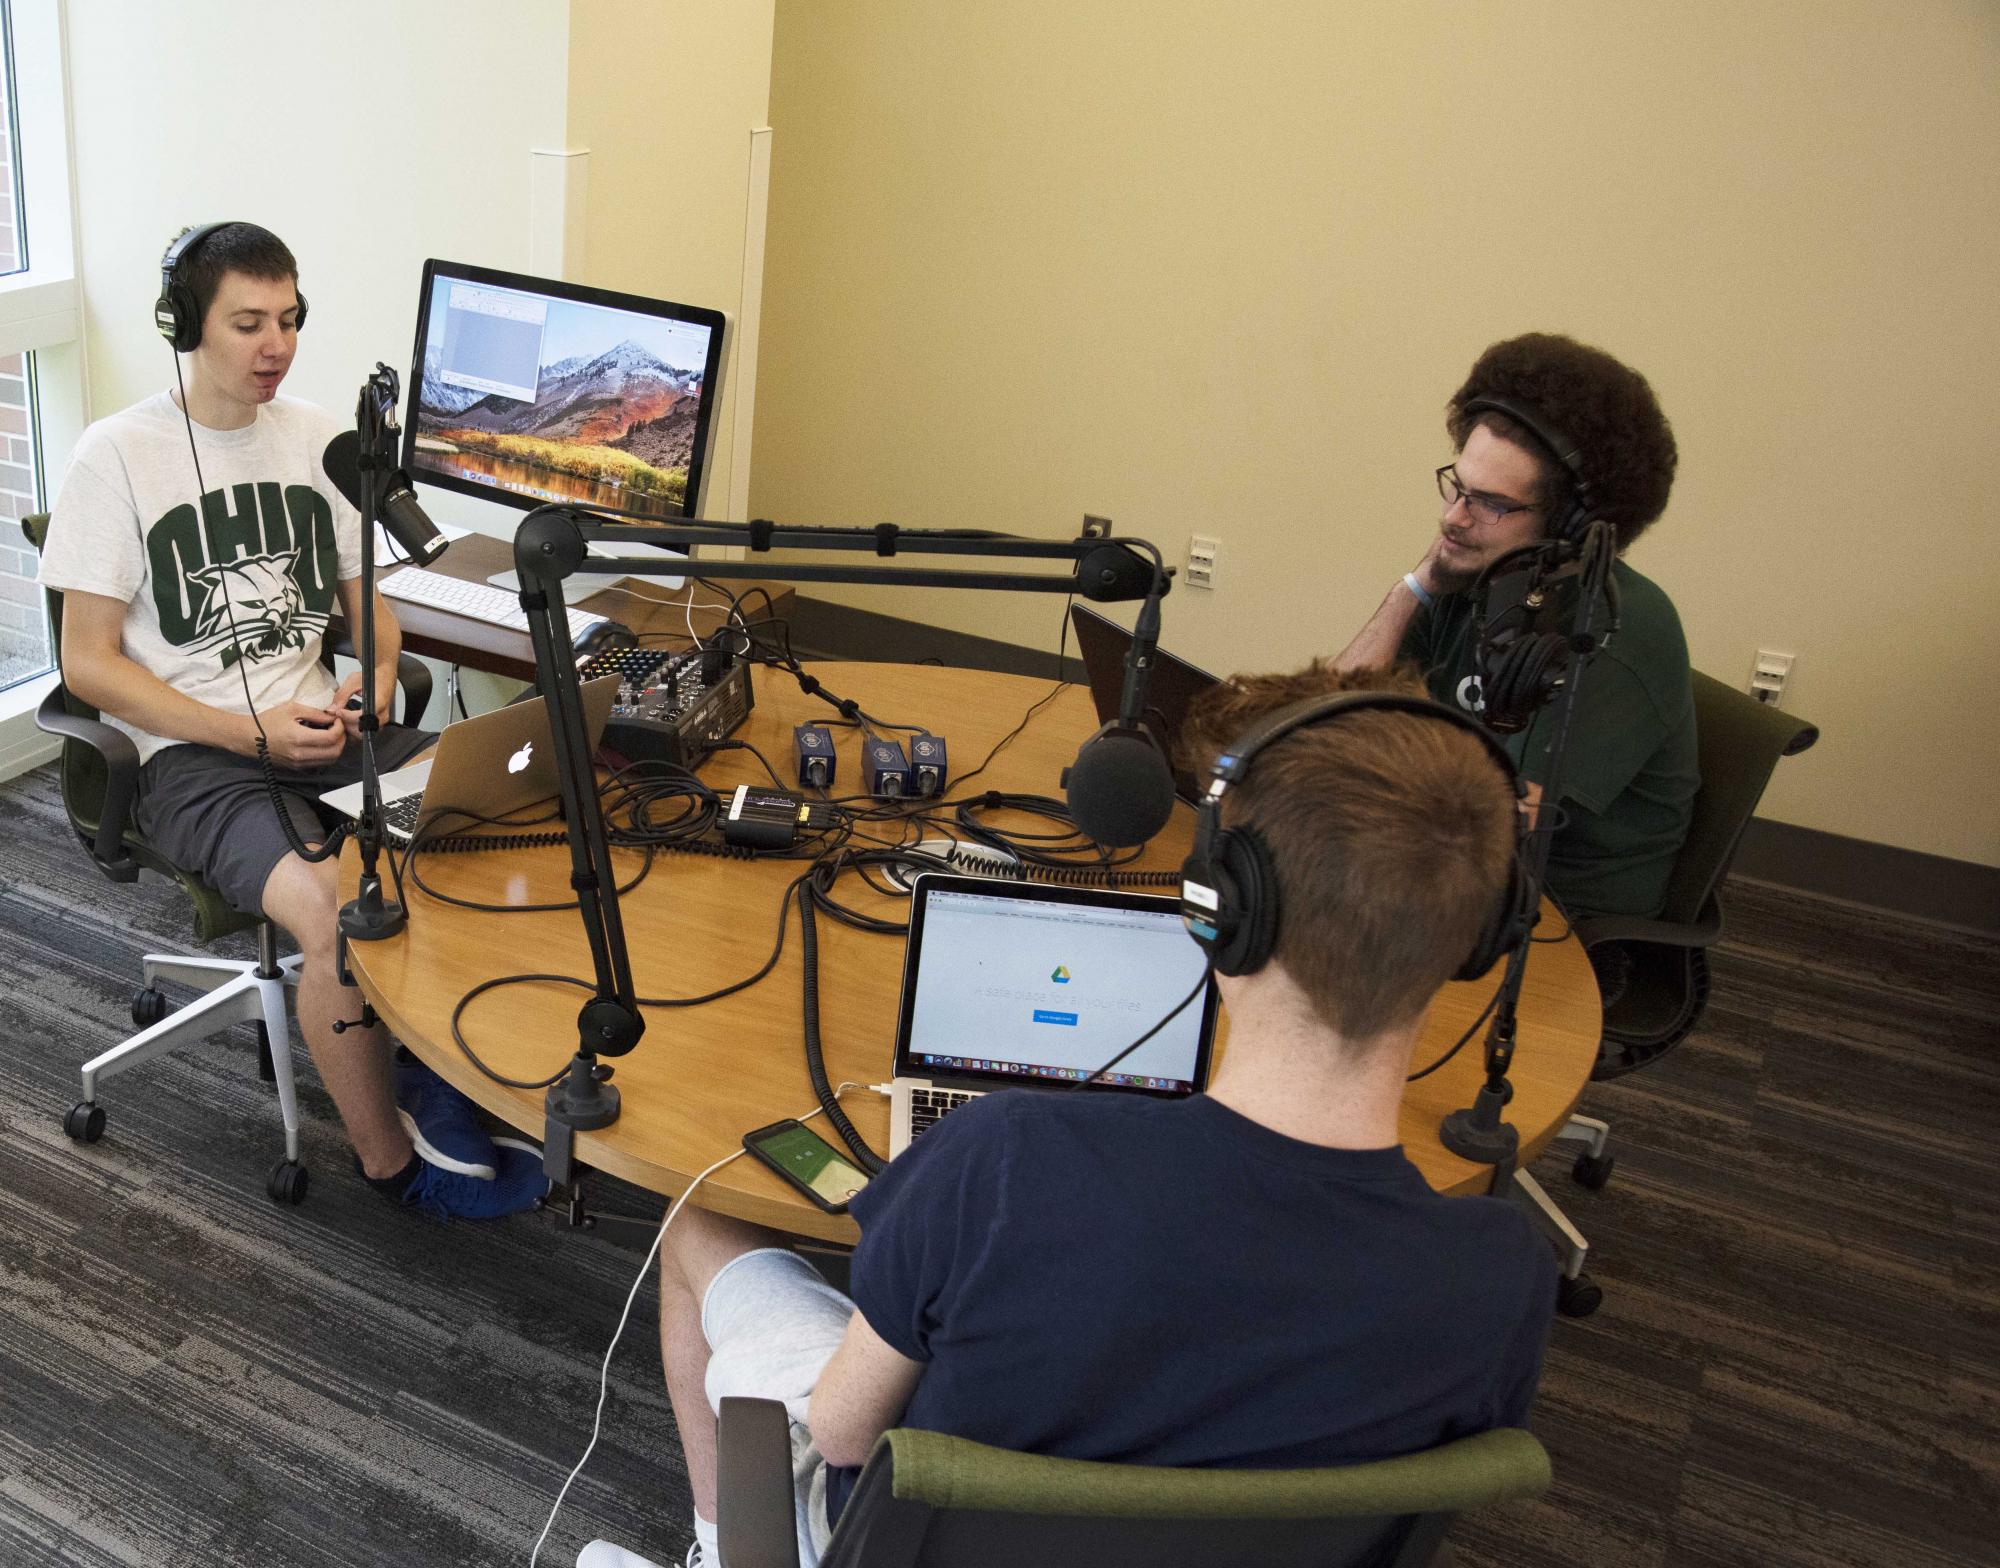 E.W. Scripps School of Journalism students recording a podcast